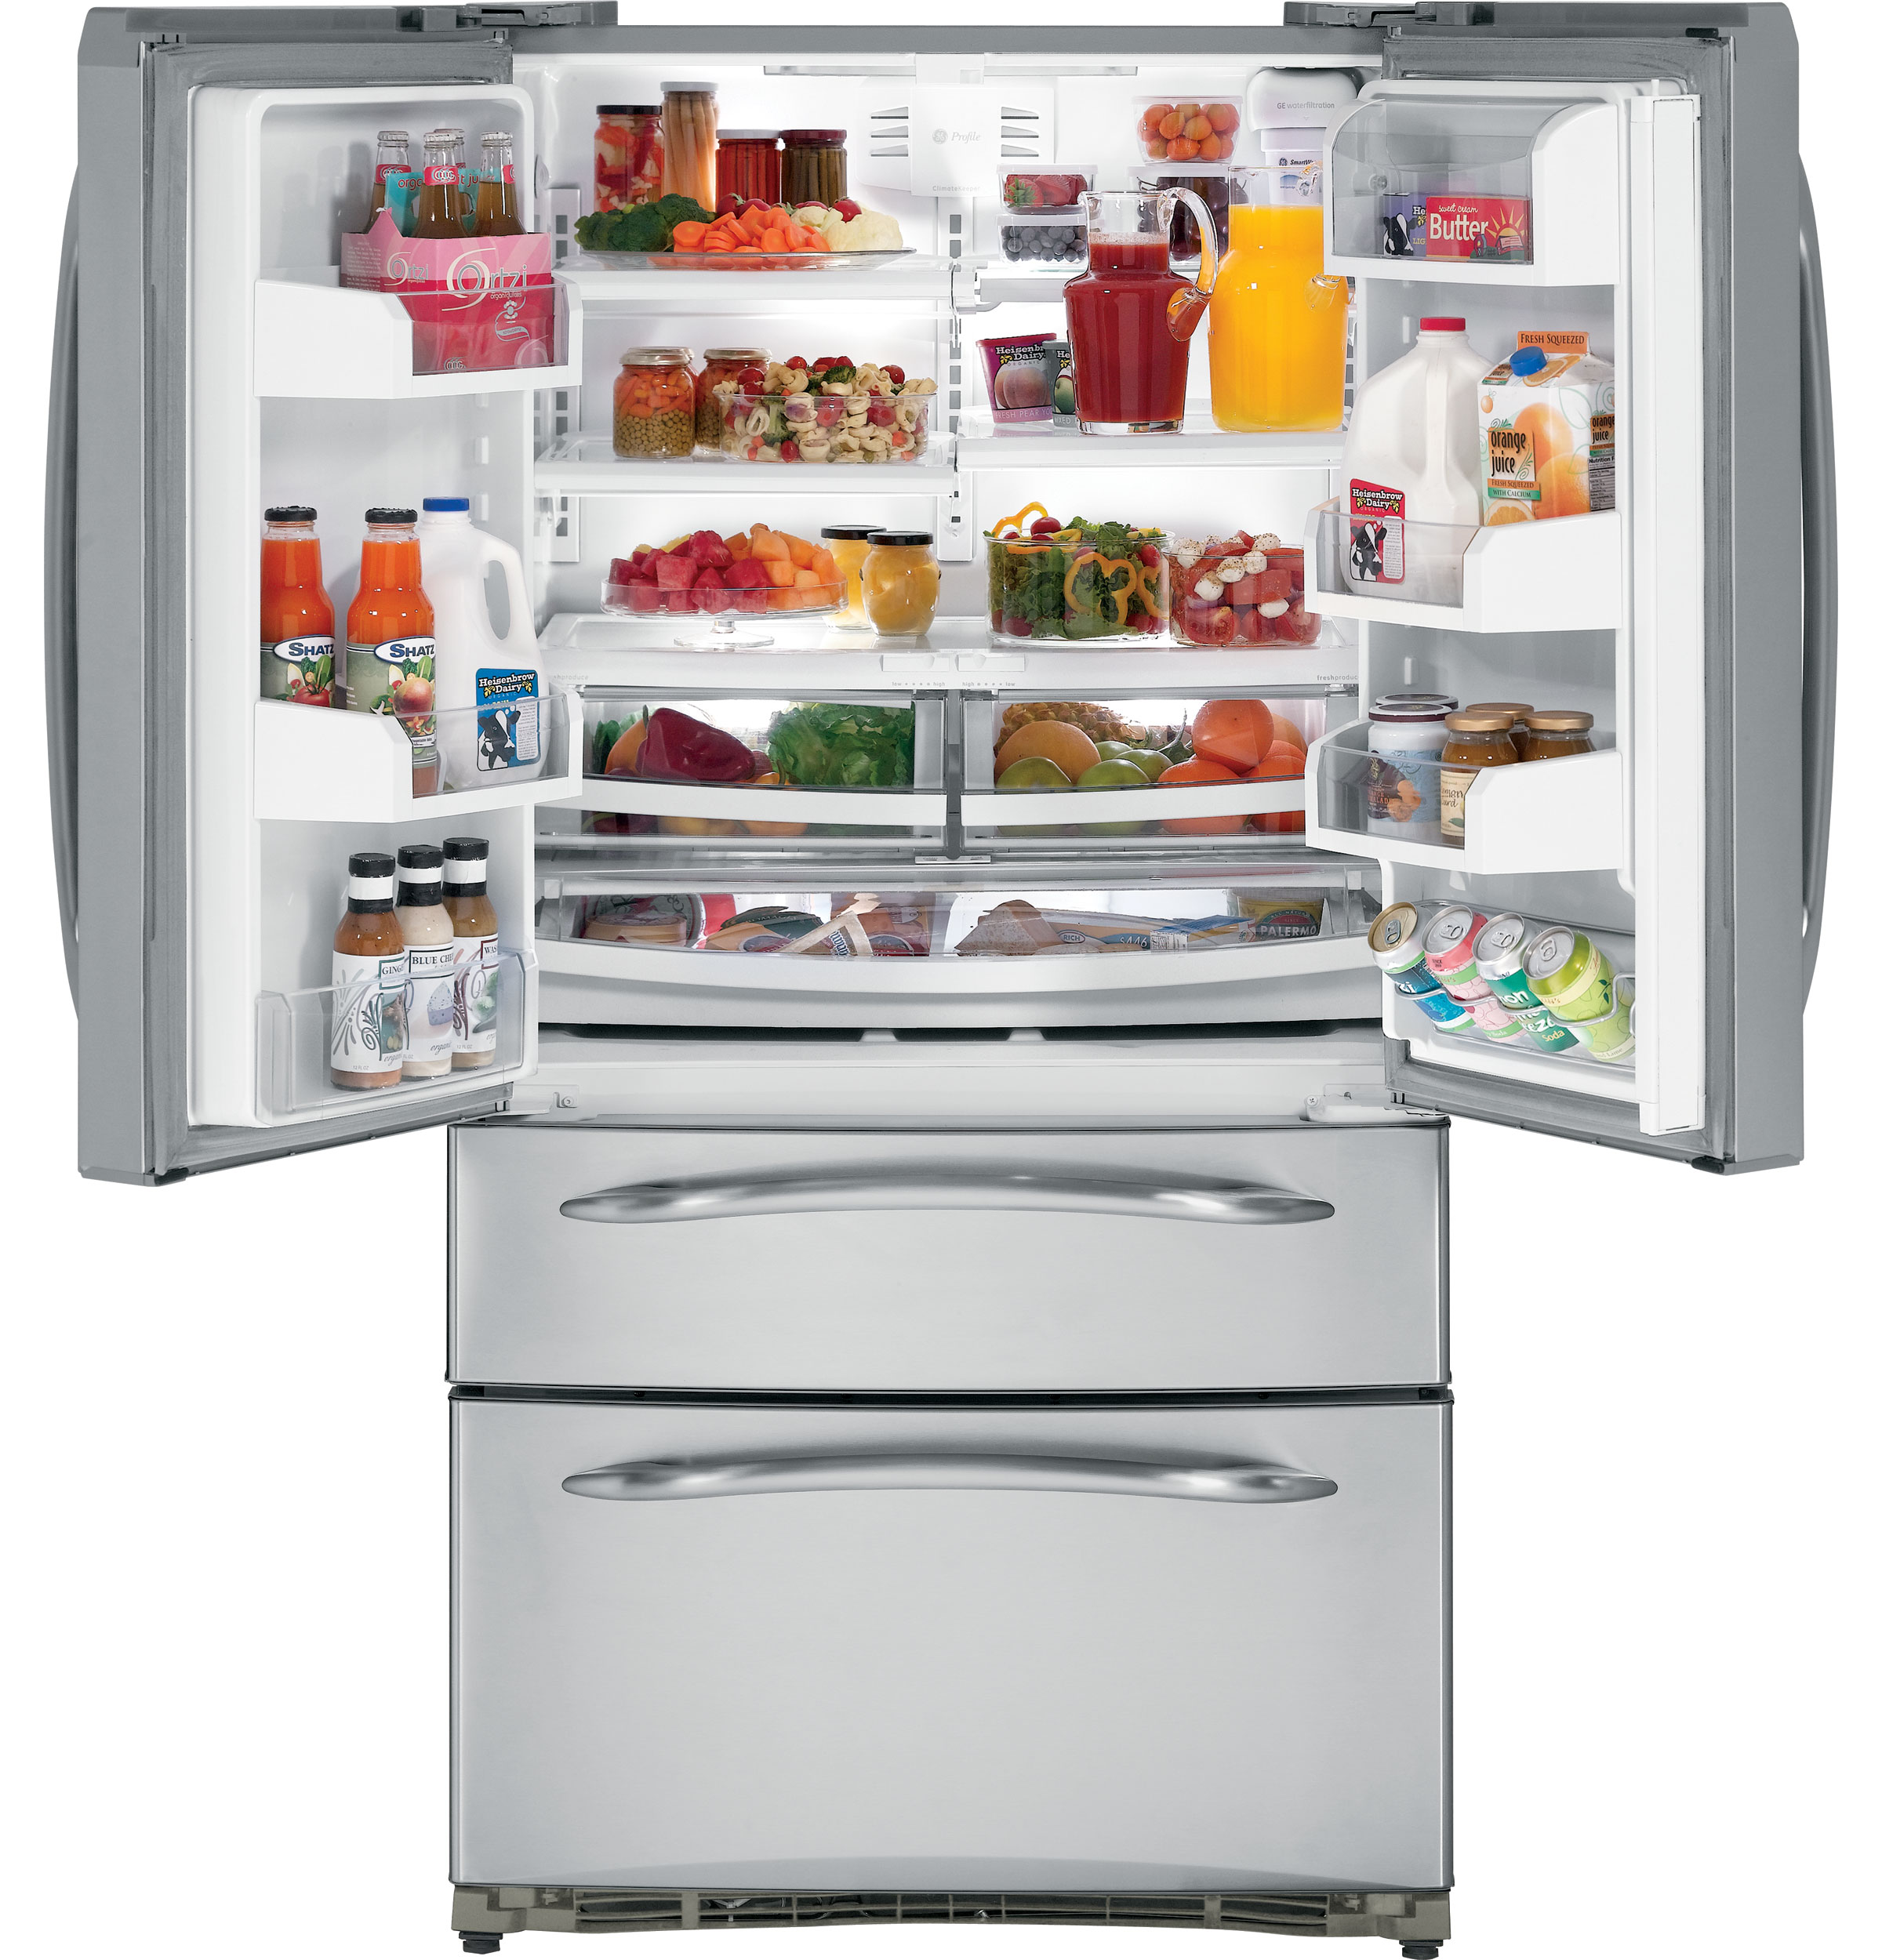 GE Profile™ 24.8 Cu. Ft. Refrigerator with Armoire Styling